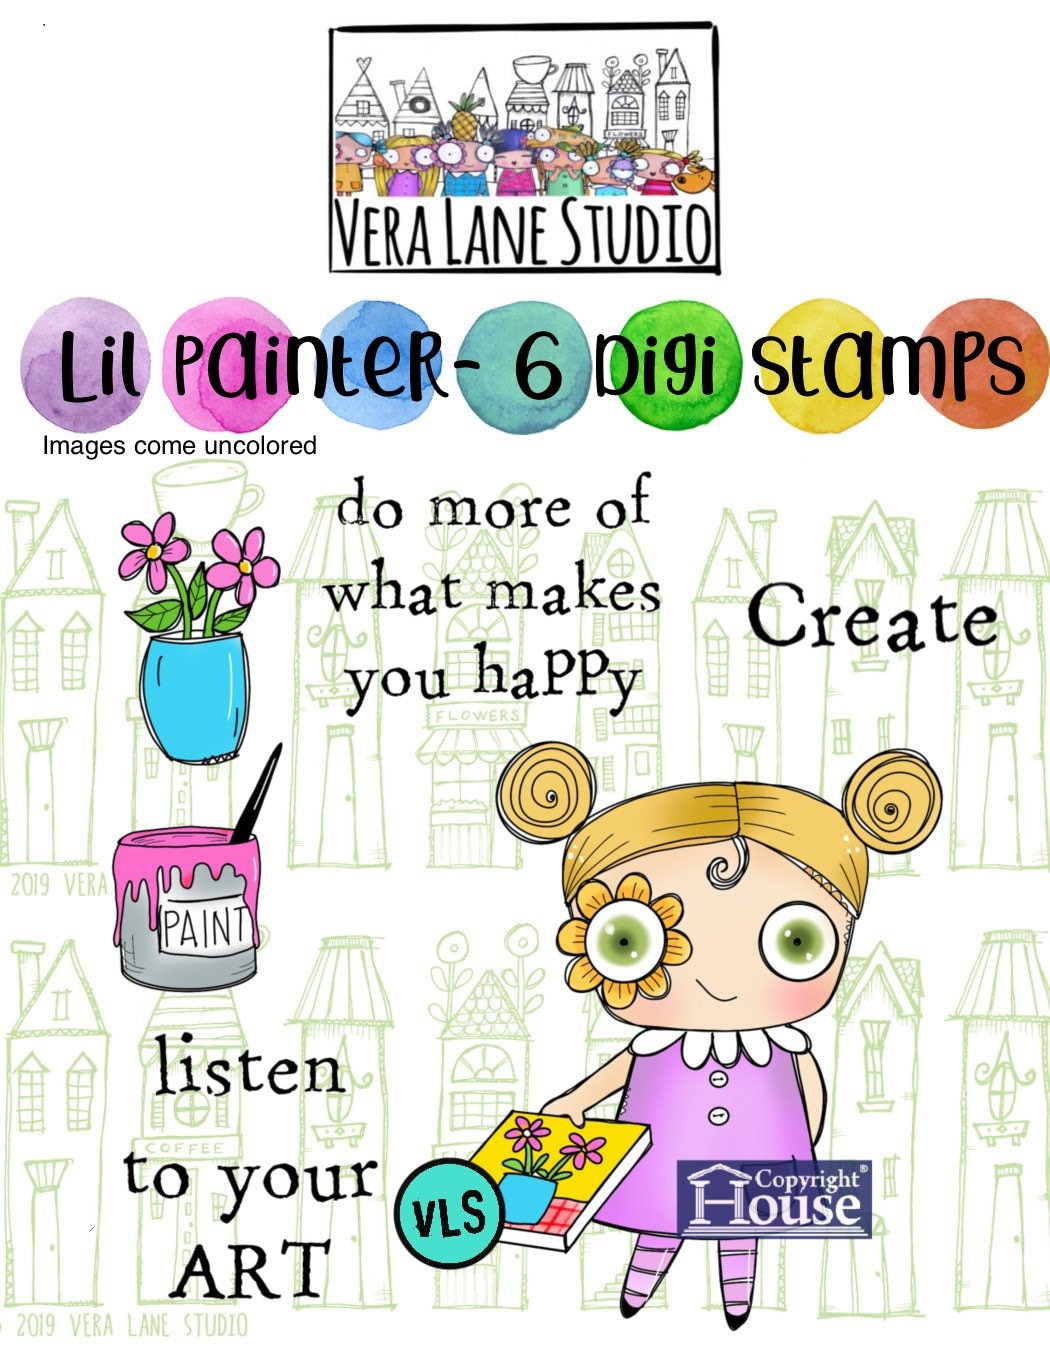 Lil Painter - 6 Digi stamps in jpg and png files